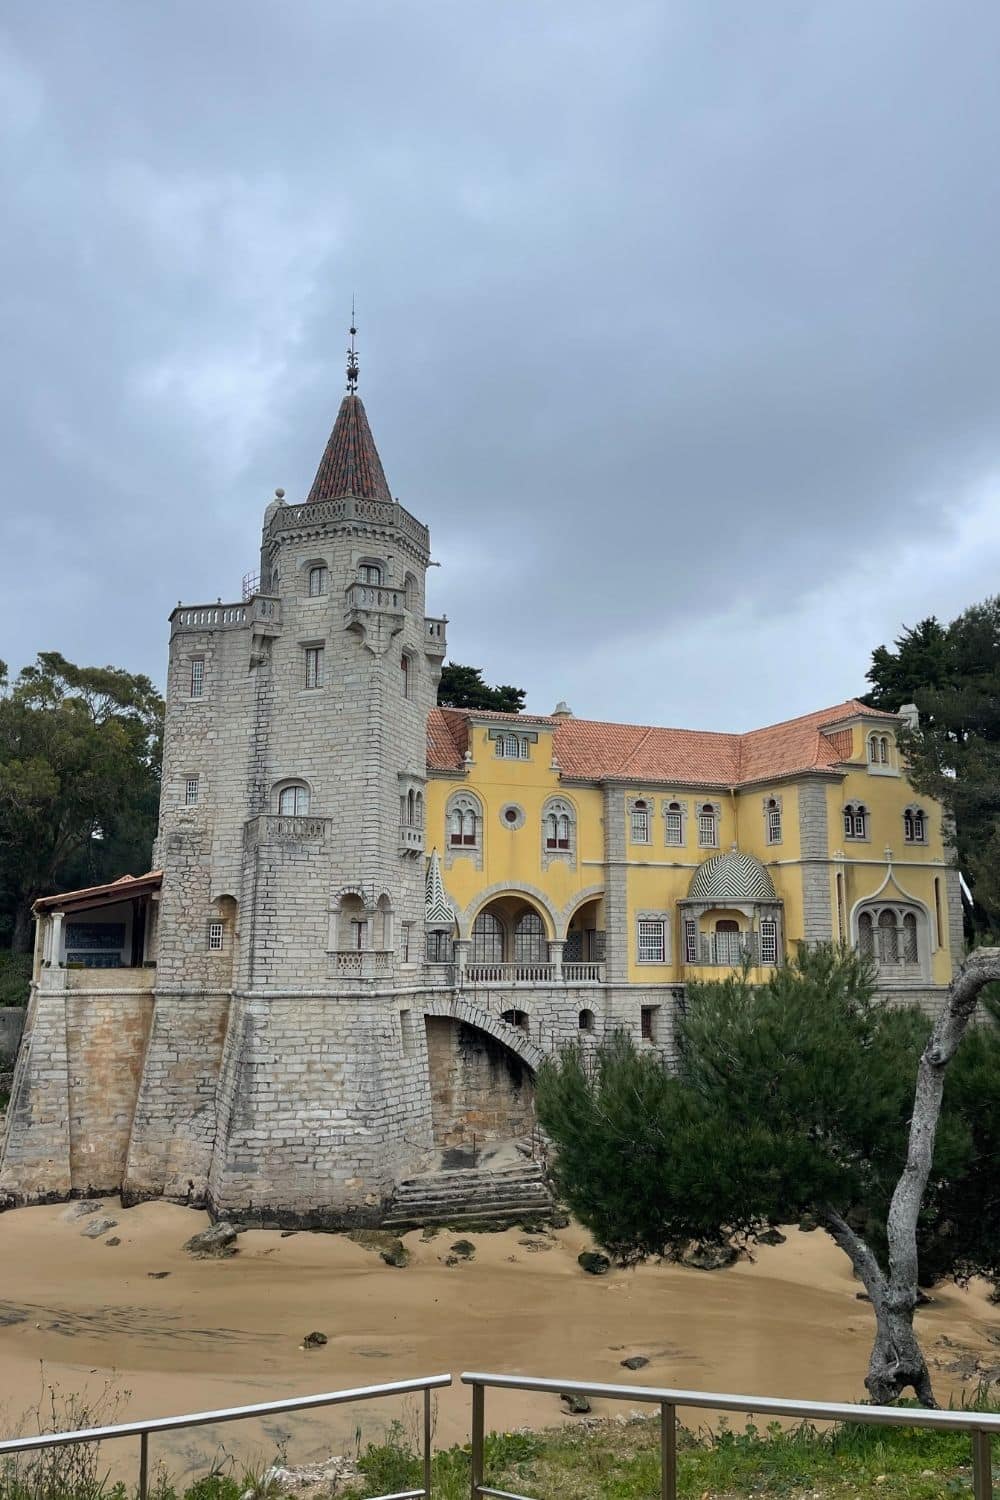 A whimsical yellow and white building with a stone tower and ornate features, reminiscent of a fairy-tale castle, set against a cloudy sky in Cascais, Portugal, conveying a sense of romantic history.